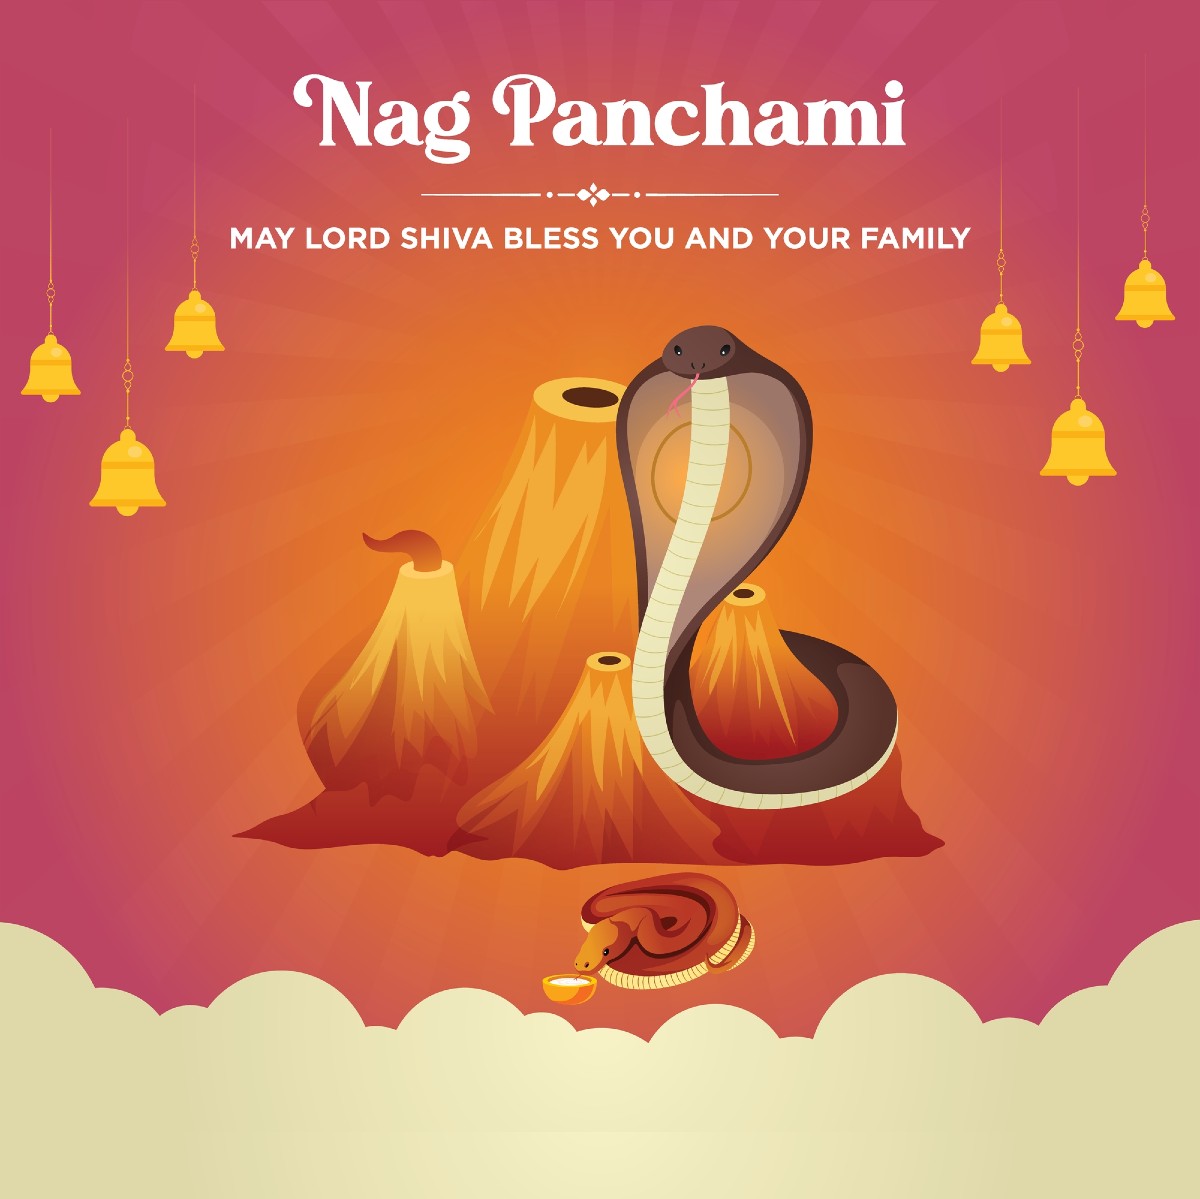 Happy Nag Panchami 2021 Images, Wishes, Quotes, Messages and WhatsApp